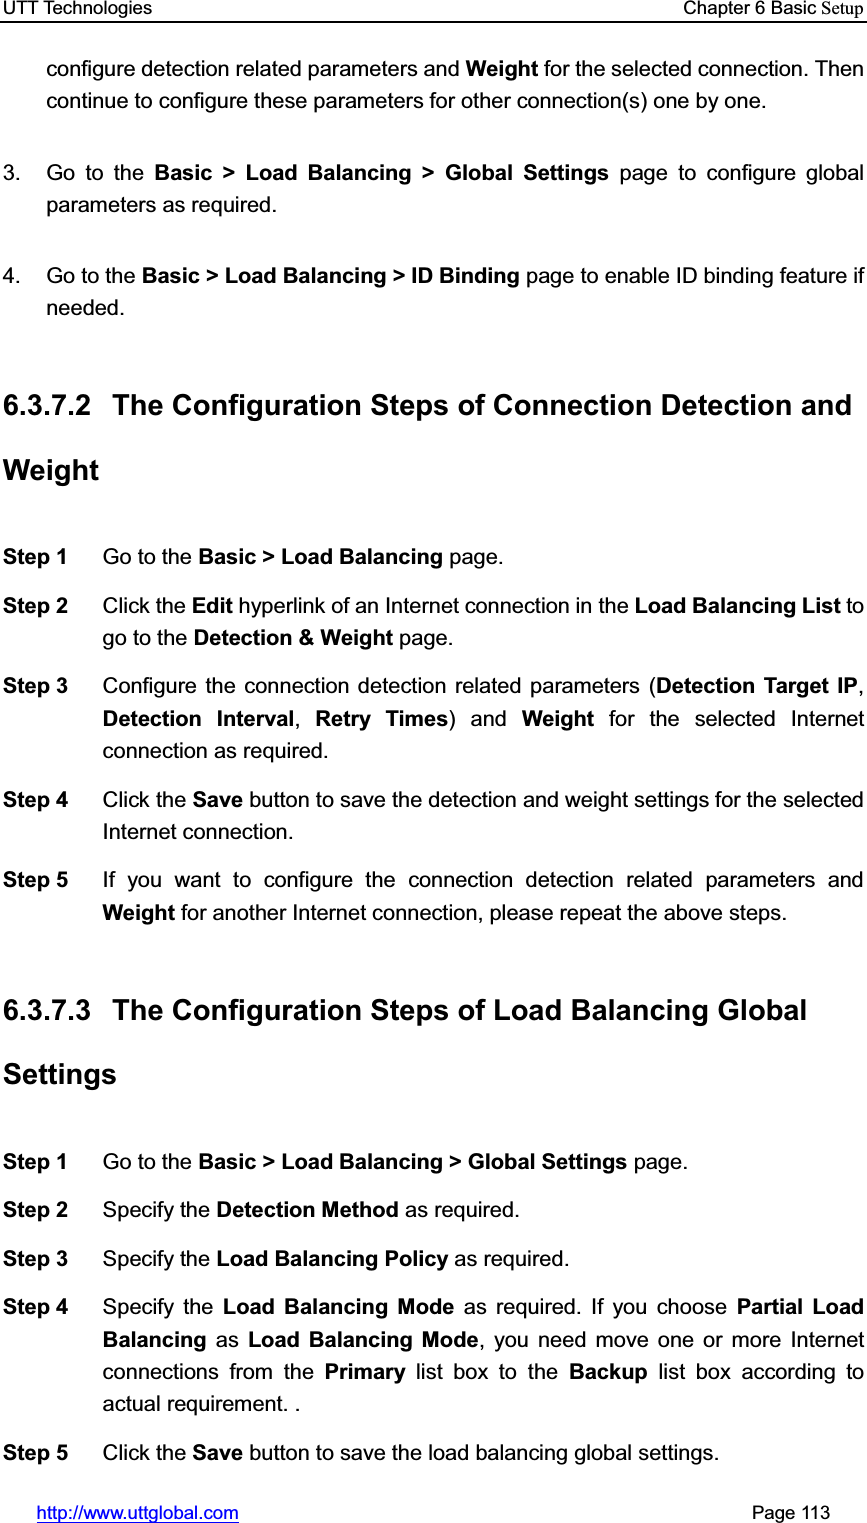 UTT Technologies    Chapter 6 Basic Setuphttp://www.uttglobal.com                                                       Page 113 configure detection related parameters and Weight for the selected connection. Then continue to configure these parameters for other connection(s) one by one.   3. Go to the Basic &gt; Load Balancing &gt; Global Settings page to configure global parameters as required. 4. Go to the Basic &gt; Load Balancing &gt; ID Binding page to enable ID binding feature if needed. 6.3.7.2  The Configuration Steps of Connection Detection and Weight Step 1  Go to the Basic &gt; Load Balancing page. Step 2  Click the Edit hyperlink of an Internet connection in the Load Balancing List to go to the Detection &amp; Weight page. Step 3  Configure the connection detection related parameters (Detection Target IP,Detection Interval,Retry Times) and Weight for the selected Internet connection as required.   Step 4  Click the Save button to save the detection and weight settings for the selected Internet connection. Step 5  If you want to configure the connection detection related parameters andWeight for another Internet connection, please repeat the above steps. 6.3.7.3  The Configuration Steps of Load Balancing Global Settings Step 1  Go to the Basic &gt; Load Balancing &gt; Global Settings page. Step 2  Specify the Detection Method as required. Step 3  Specify the Load Balancing Policy as required. Step 4  Specify the Load Balancing Mode as required. If you choose Partial Load Balancing as Load Balancing Mode, you need move one or more Internet connections from the Primary list box to the Backup list box according to actual requirement. . Step 5  Click the Save button to save the load balancing global settings.   